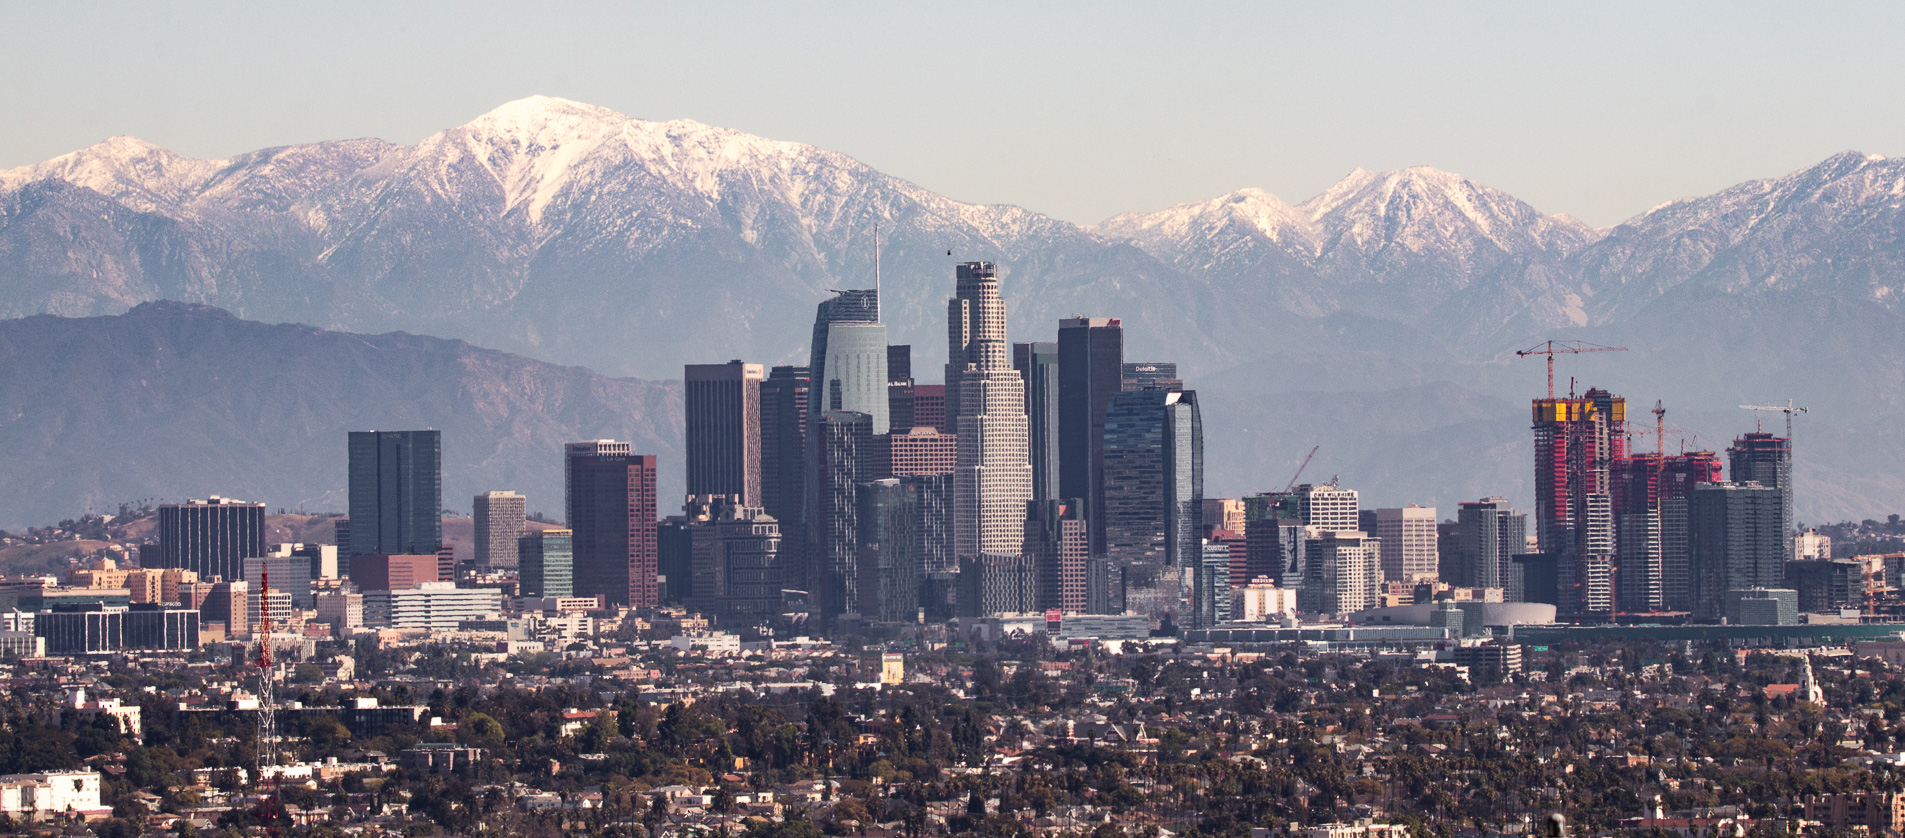 Los Angeles with San Gabriel Mountains